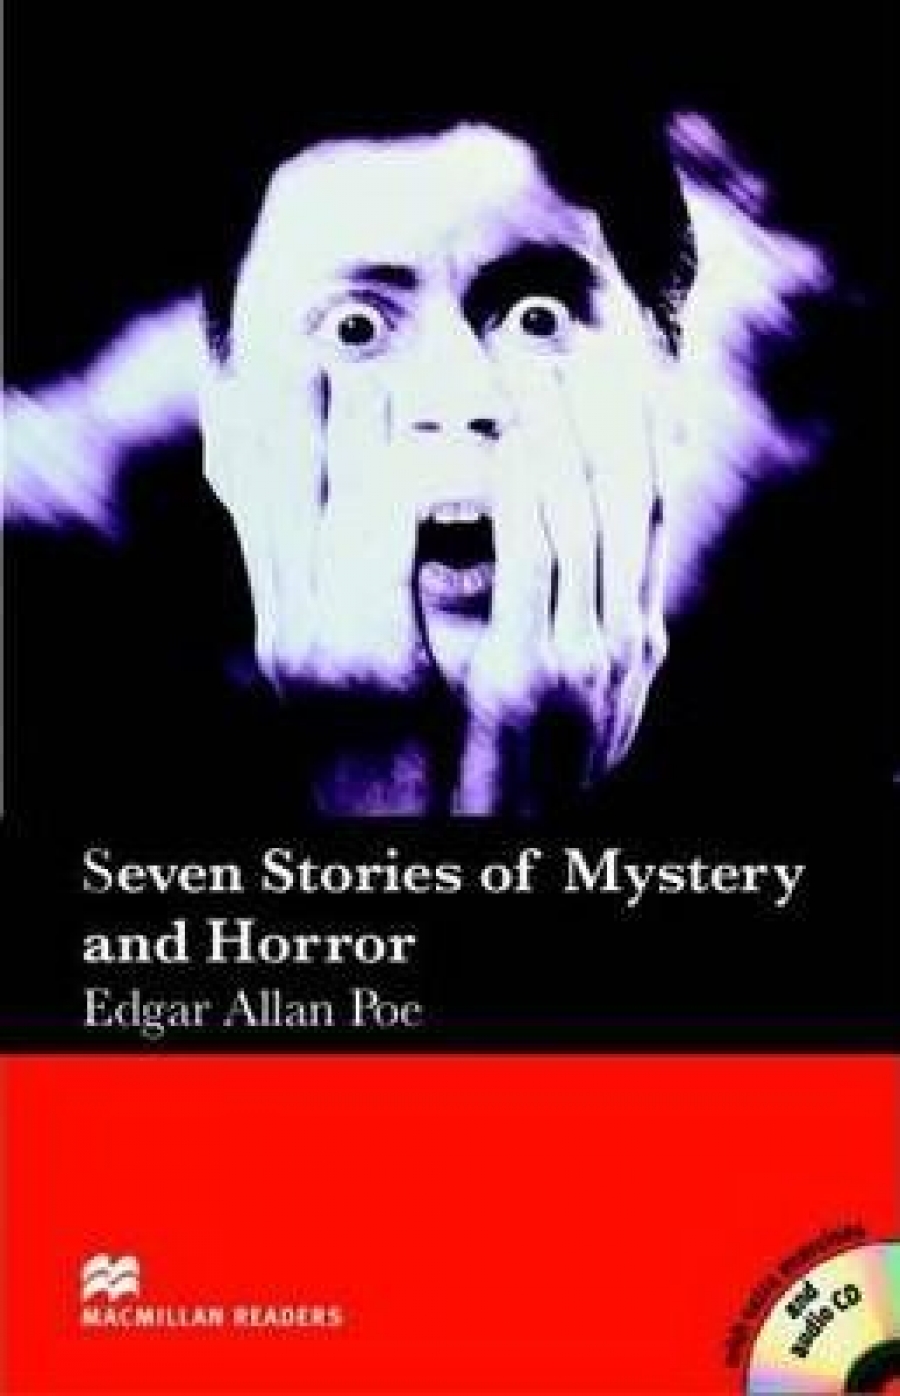 Edgar Allan Poe, retold by Stephen Colbourn Seven Stories of Mystery and Horror (with Audio CD) 